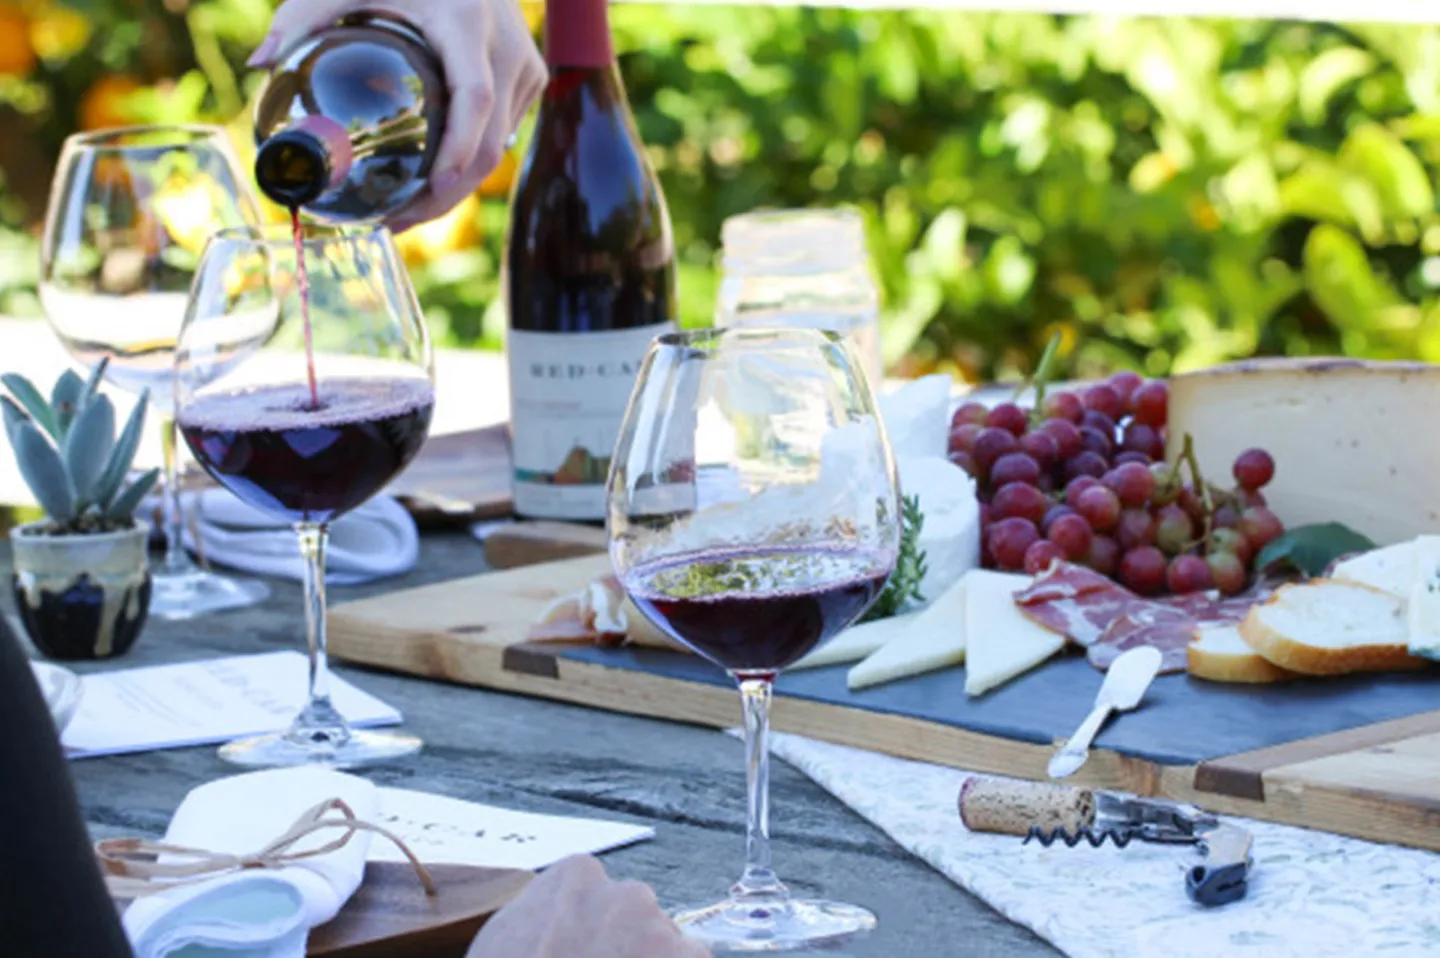 Enjoy wine tastings in California's renowned Carmel Valley and Paso Robles